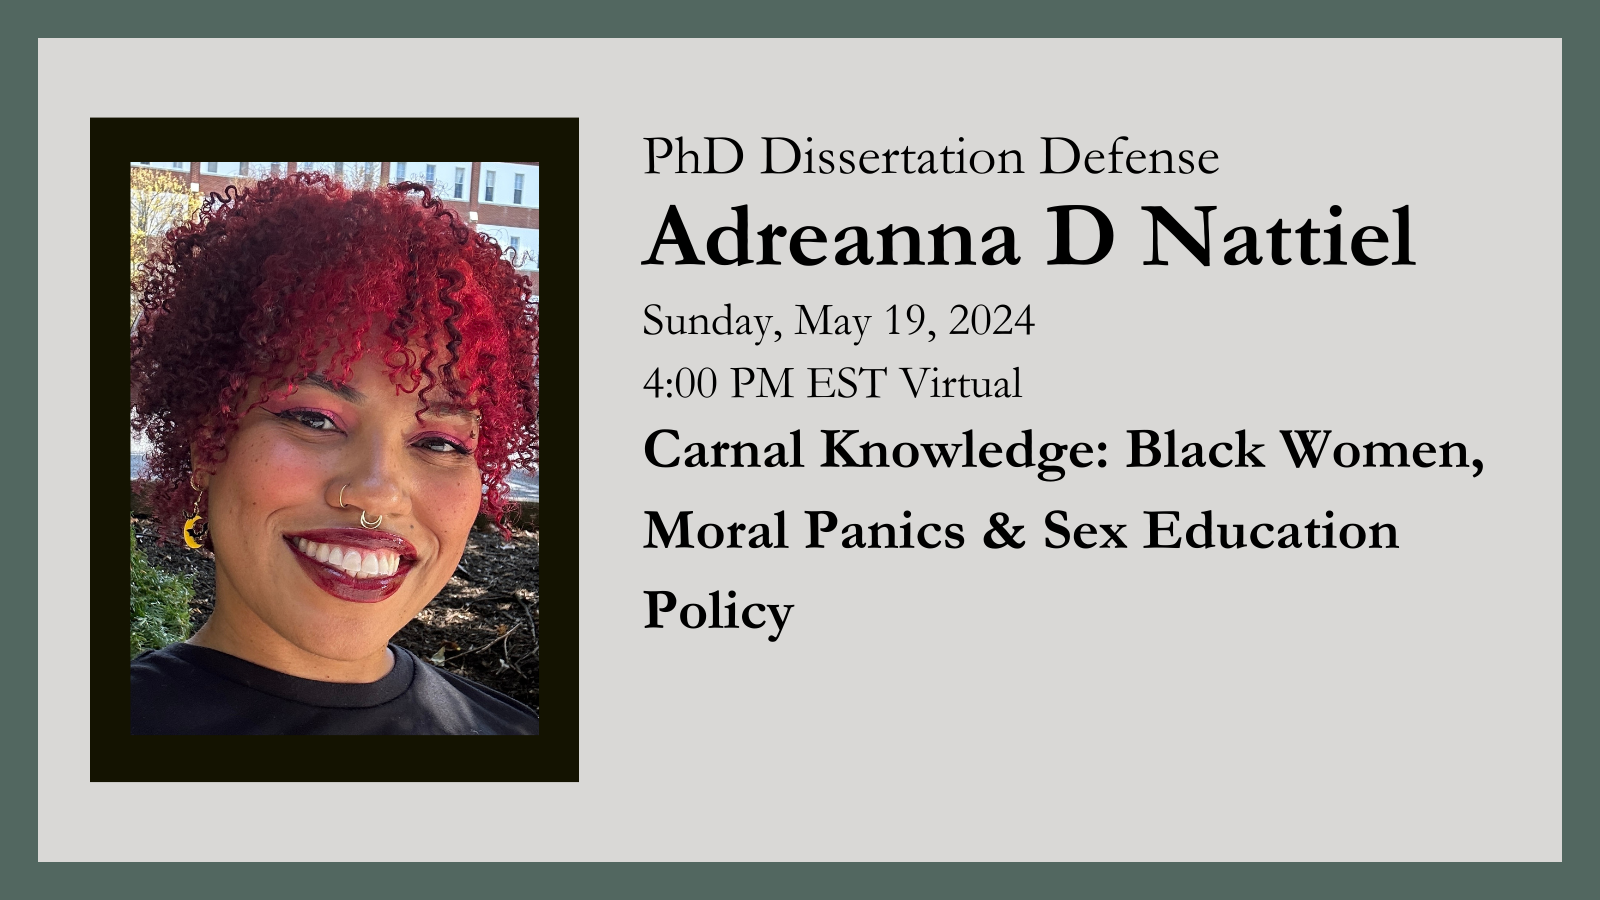 Dark green border on a light background. Headshot of Adreanna is framed in black to the left and title and time of dissertation are on the right